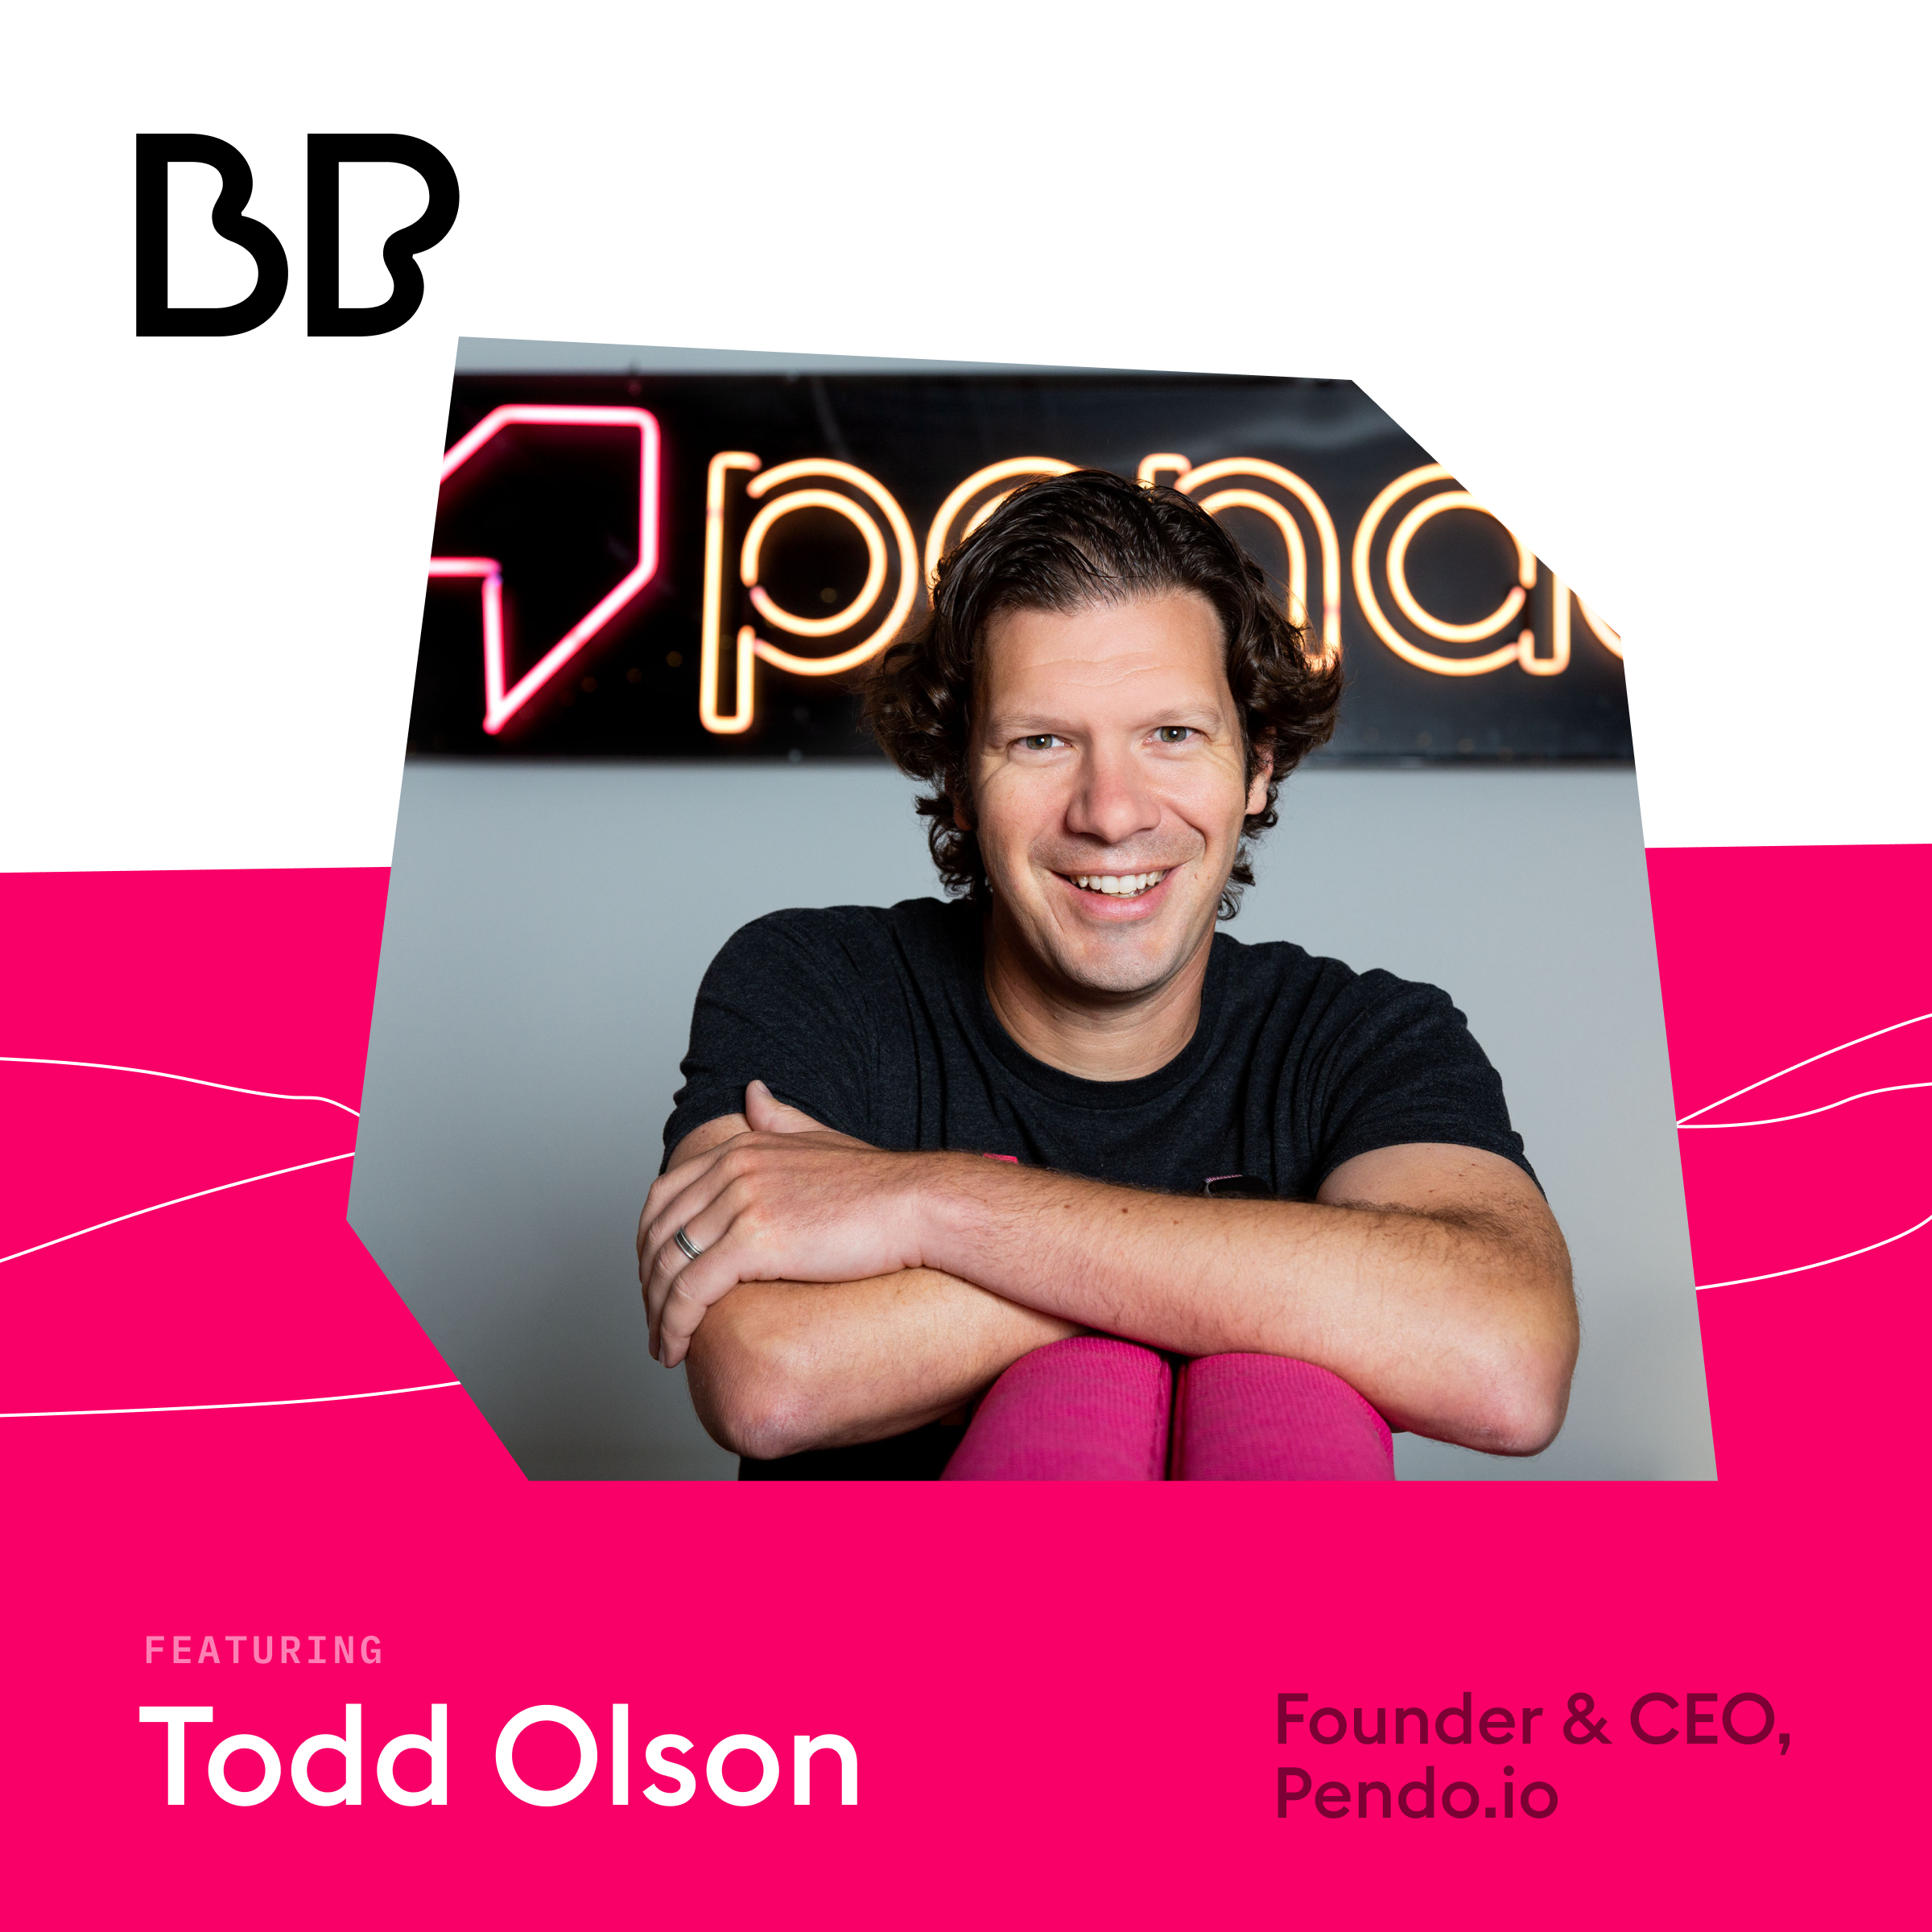 Better Product LAUNCH: Todd Olson, Pendo